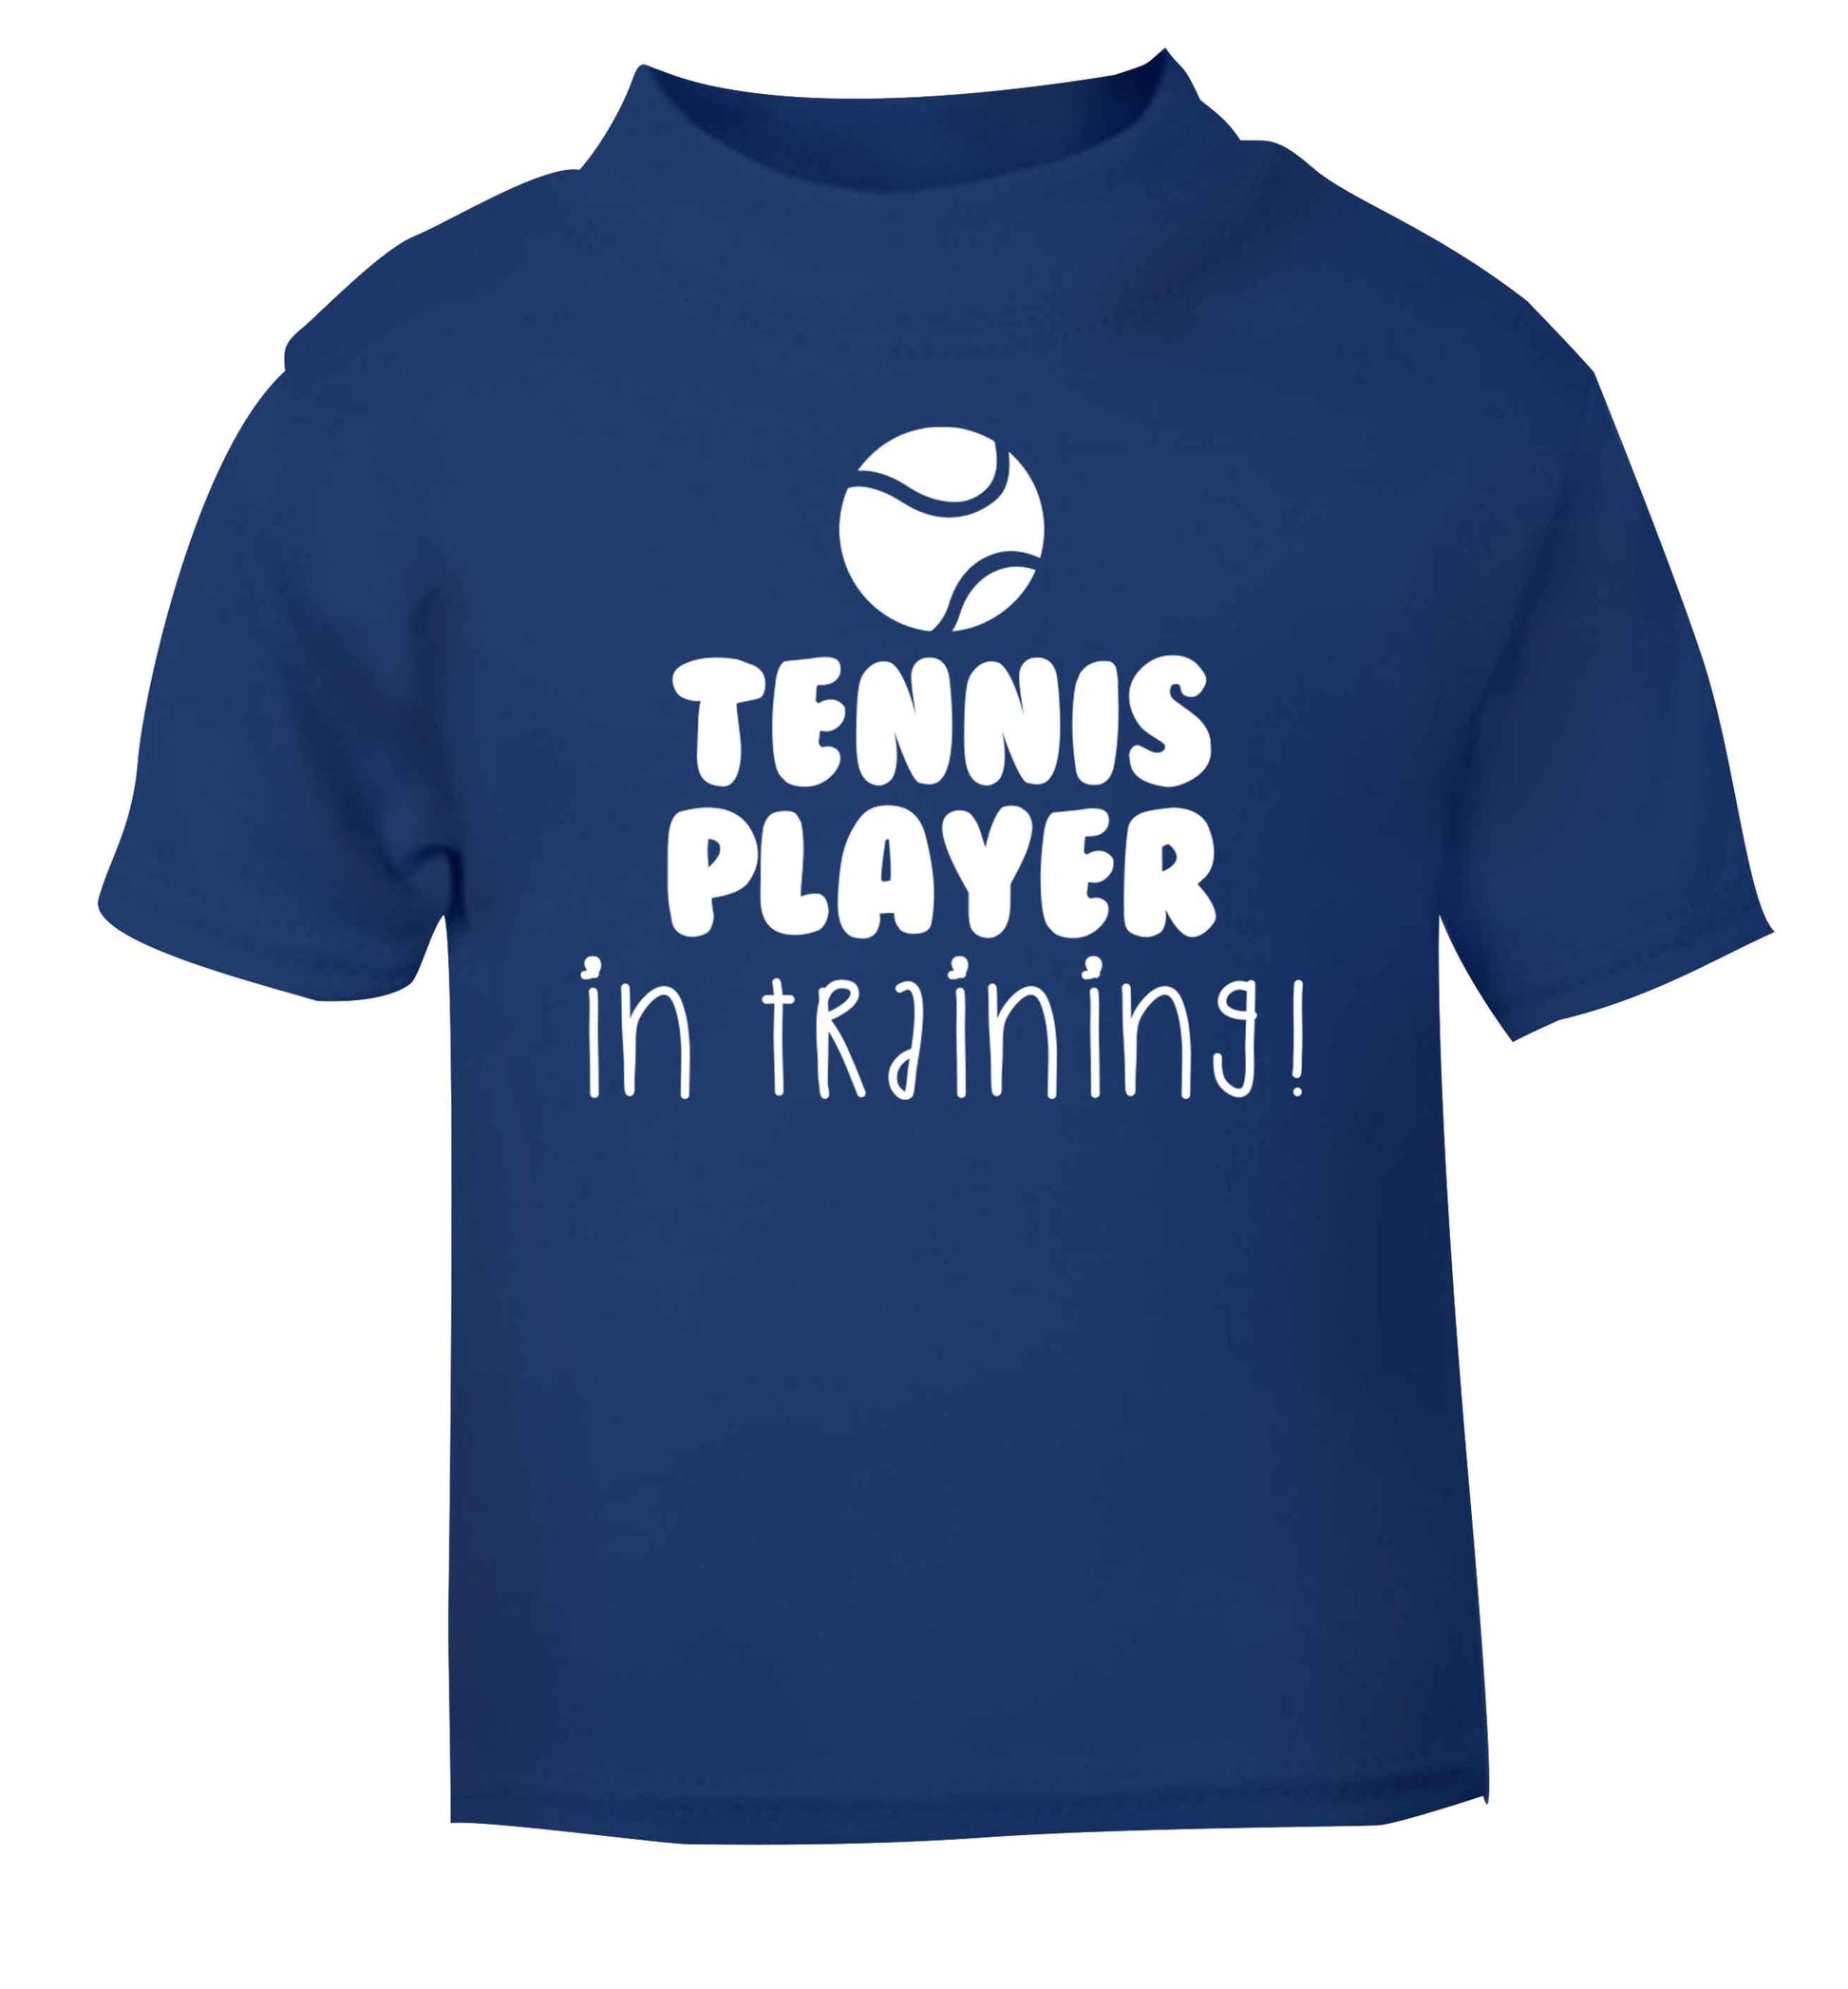 Tennis player in training blue Baby Toddler Tshirt 2 Years